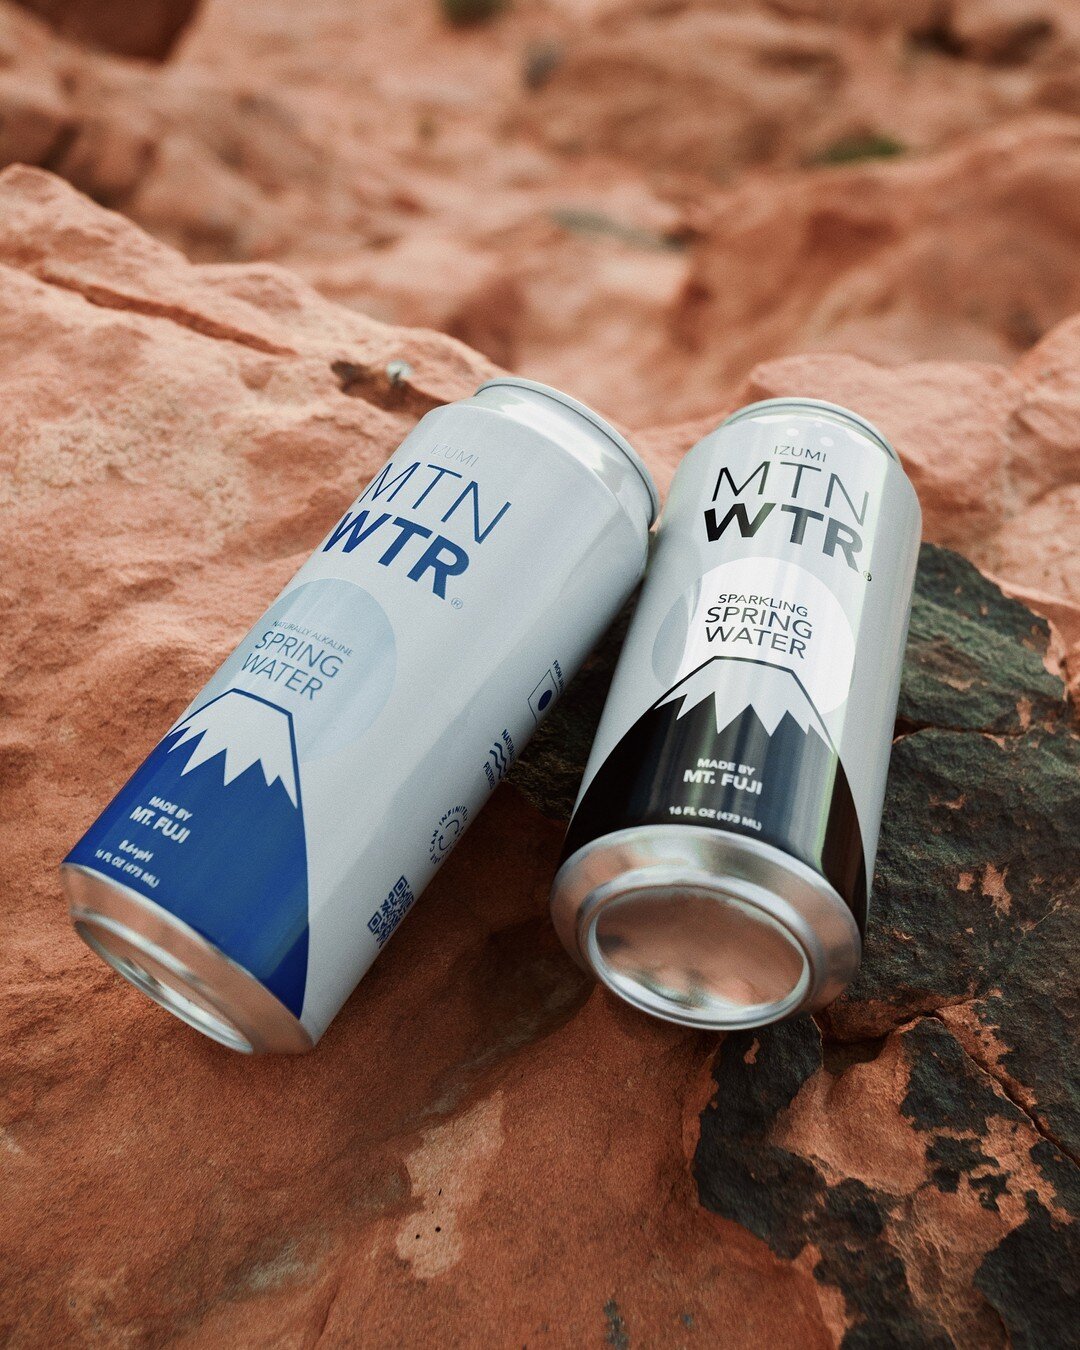 Let your self-care routine start with MTNWTR​​​​​​​​​
#drinkmtnwtr #nature
#hydrate #selfcare #japanmade